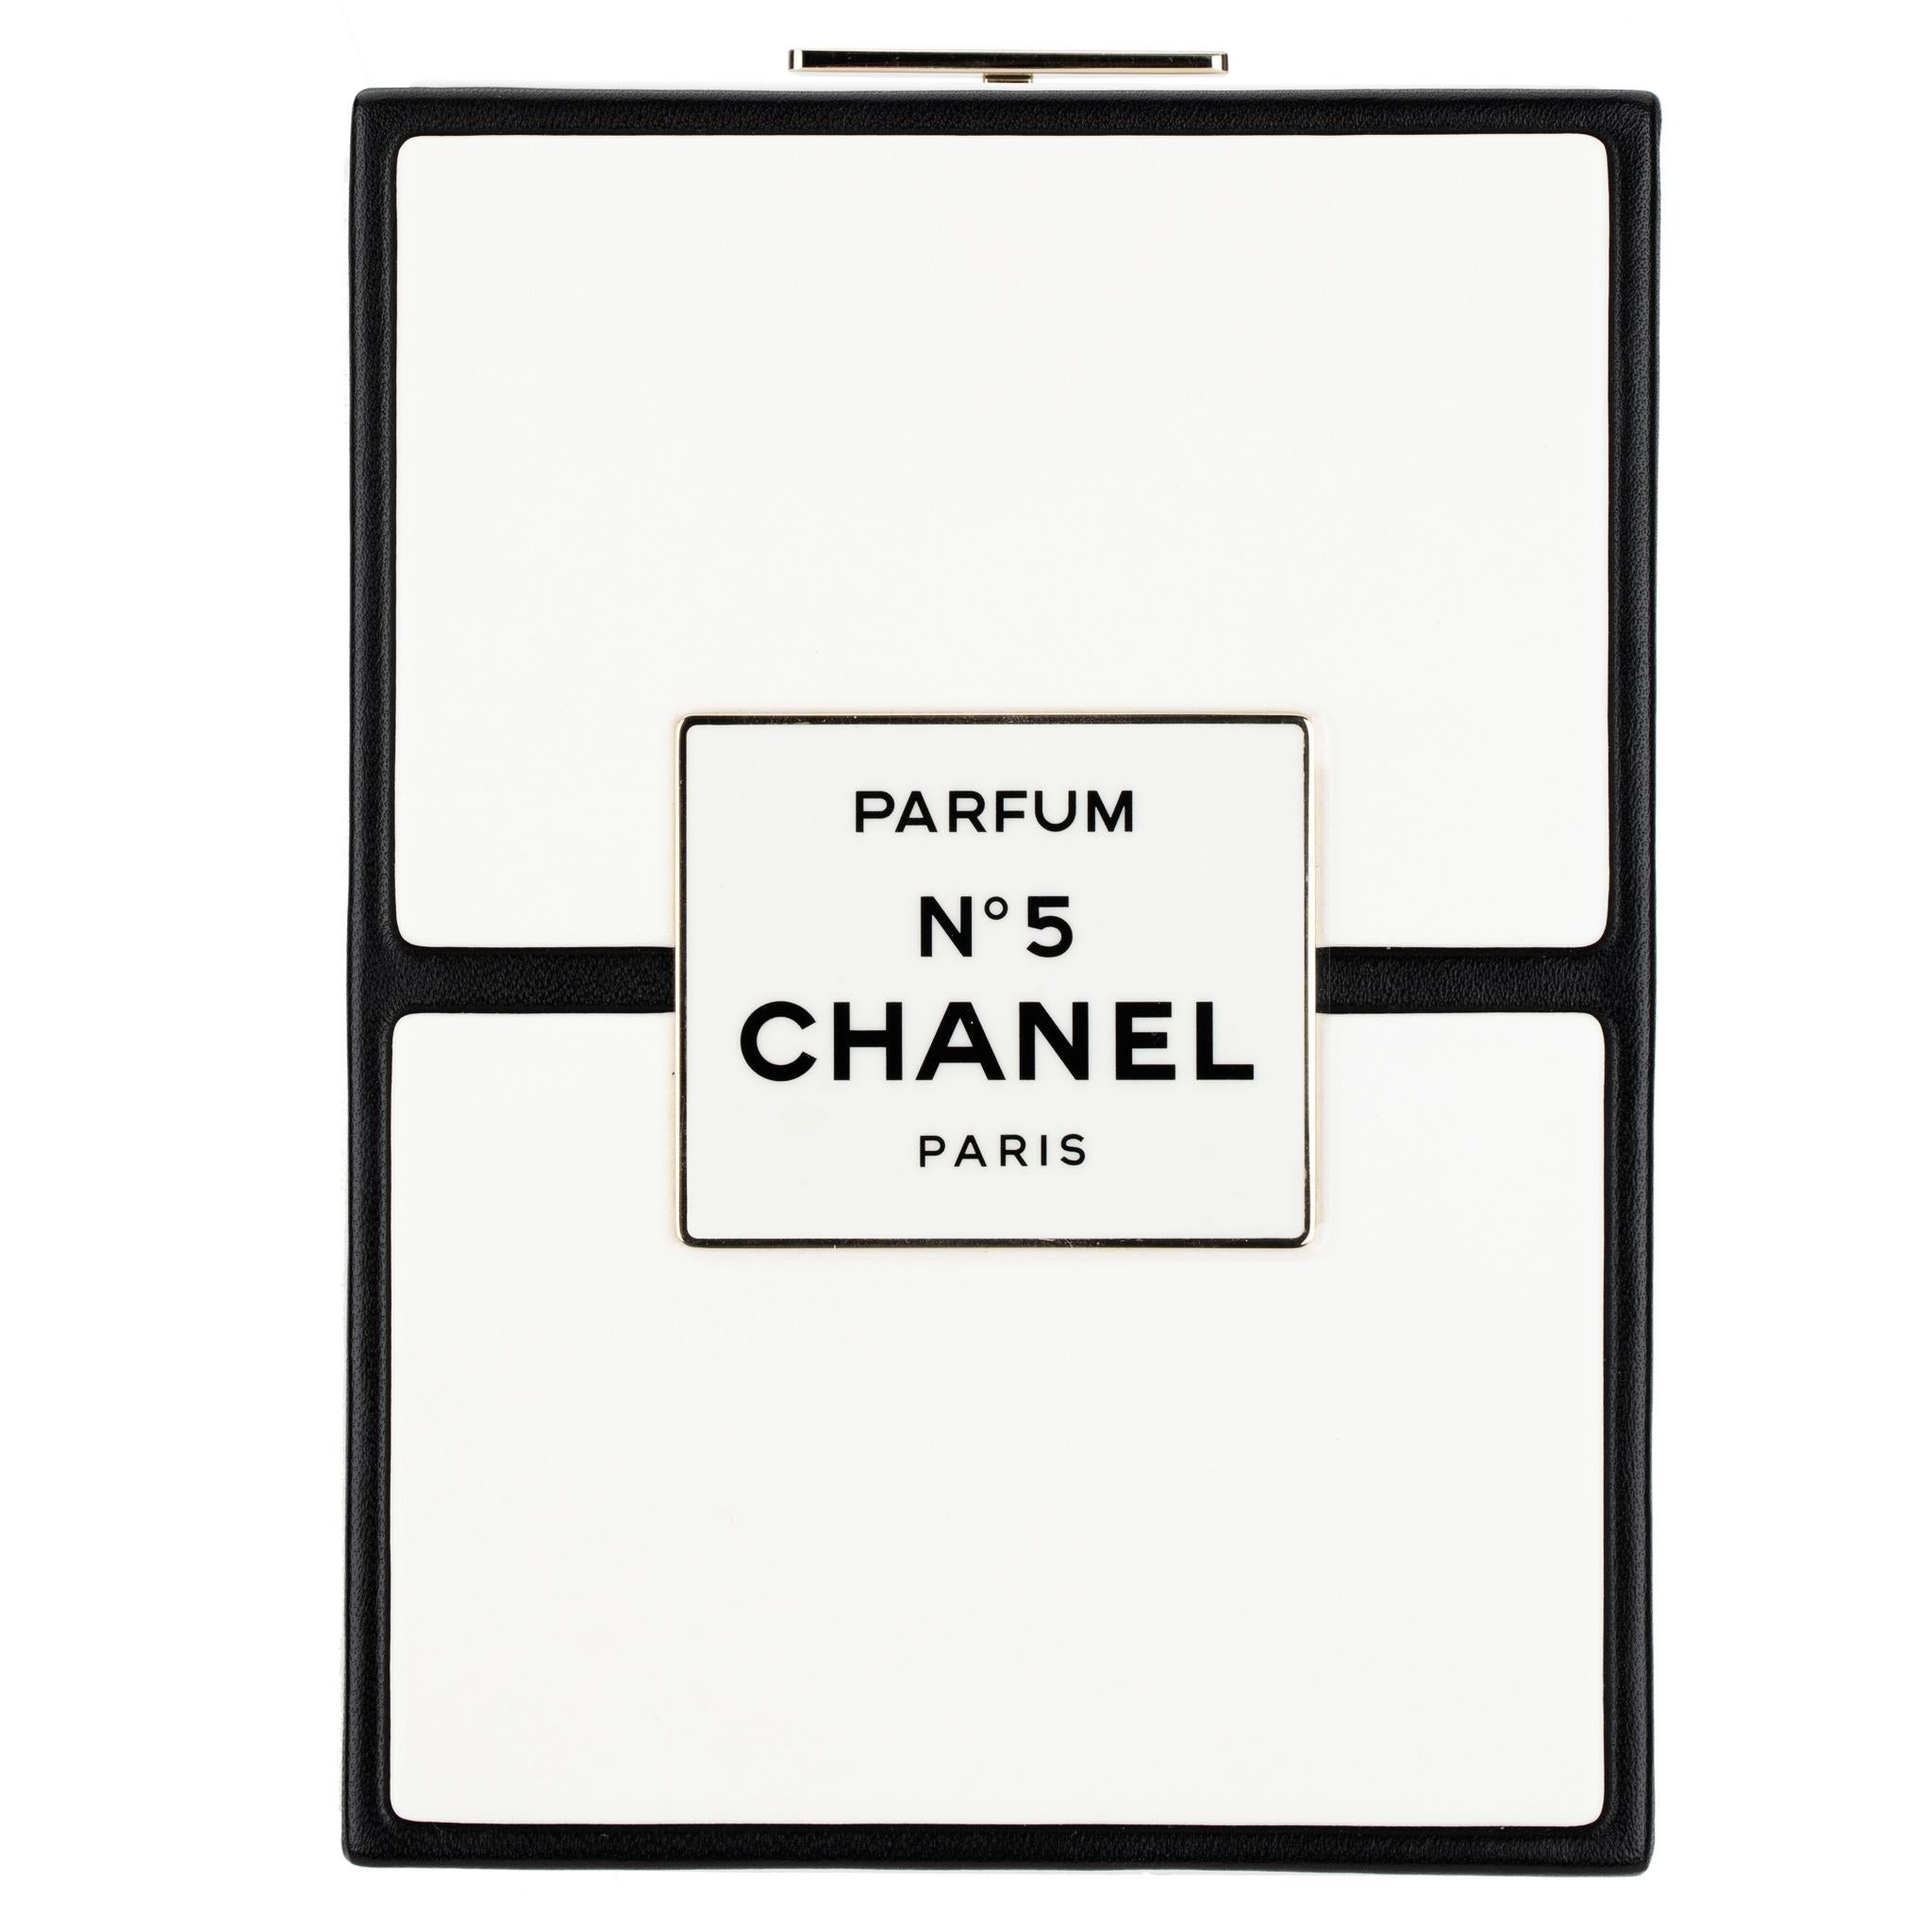 Exclusive Chanel Minaudière Limited Edition Set of 20 10